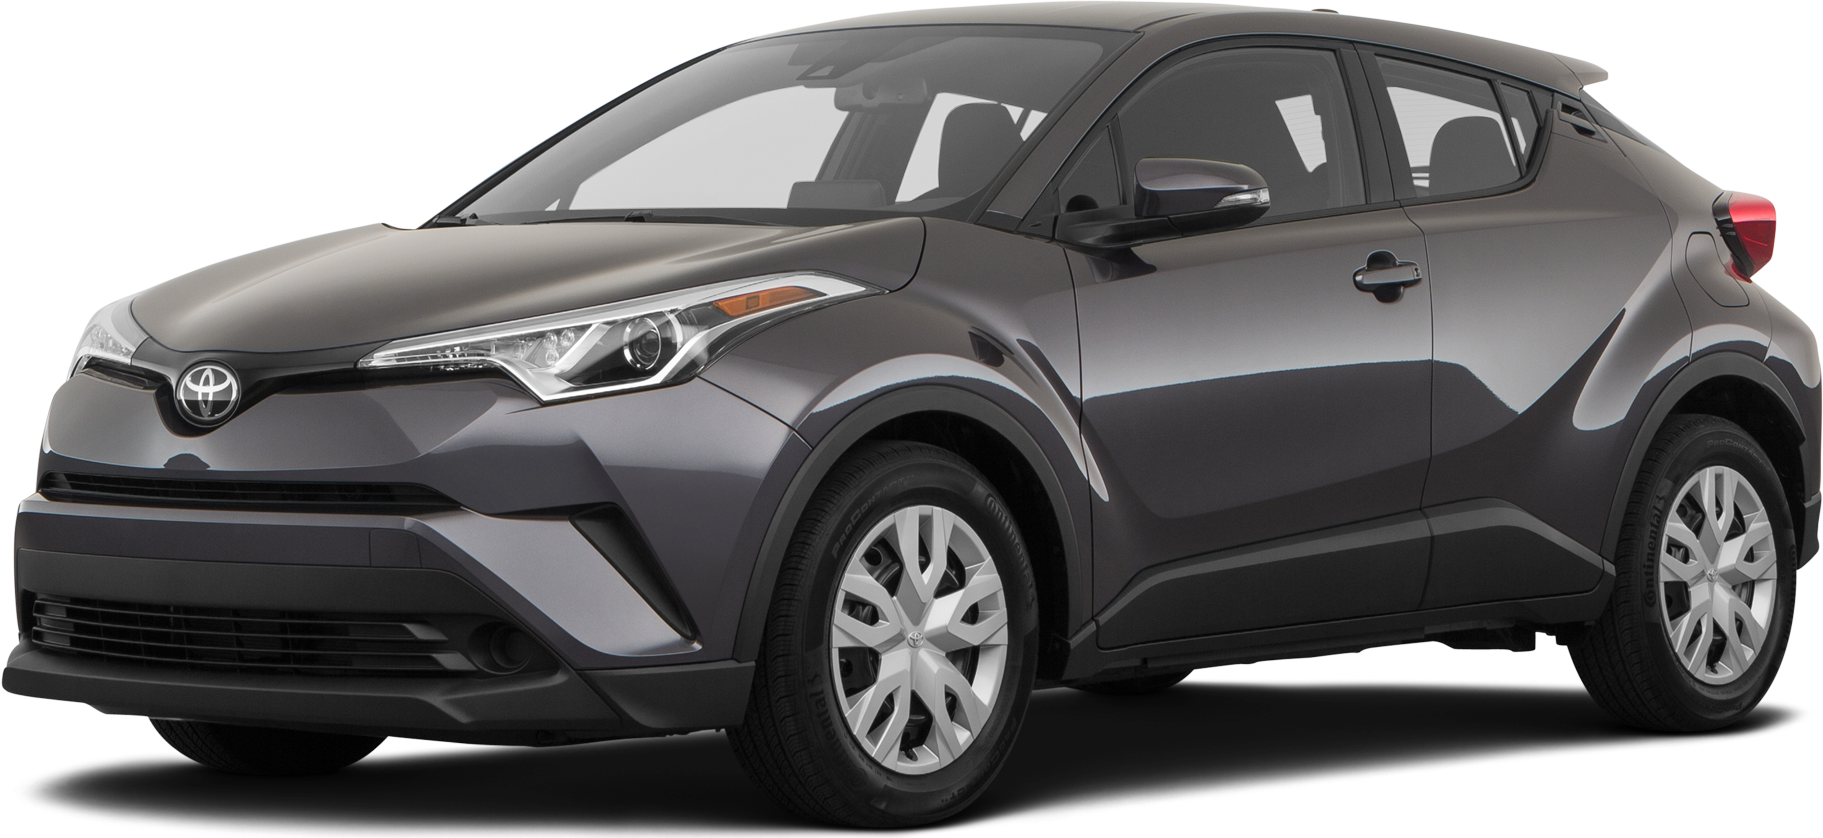 Toyota crossover cost